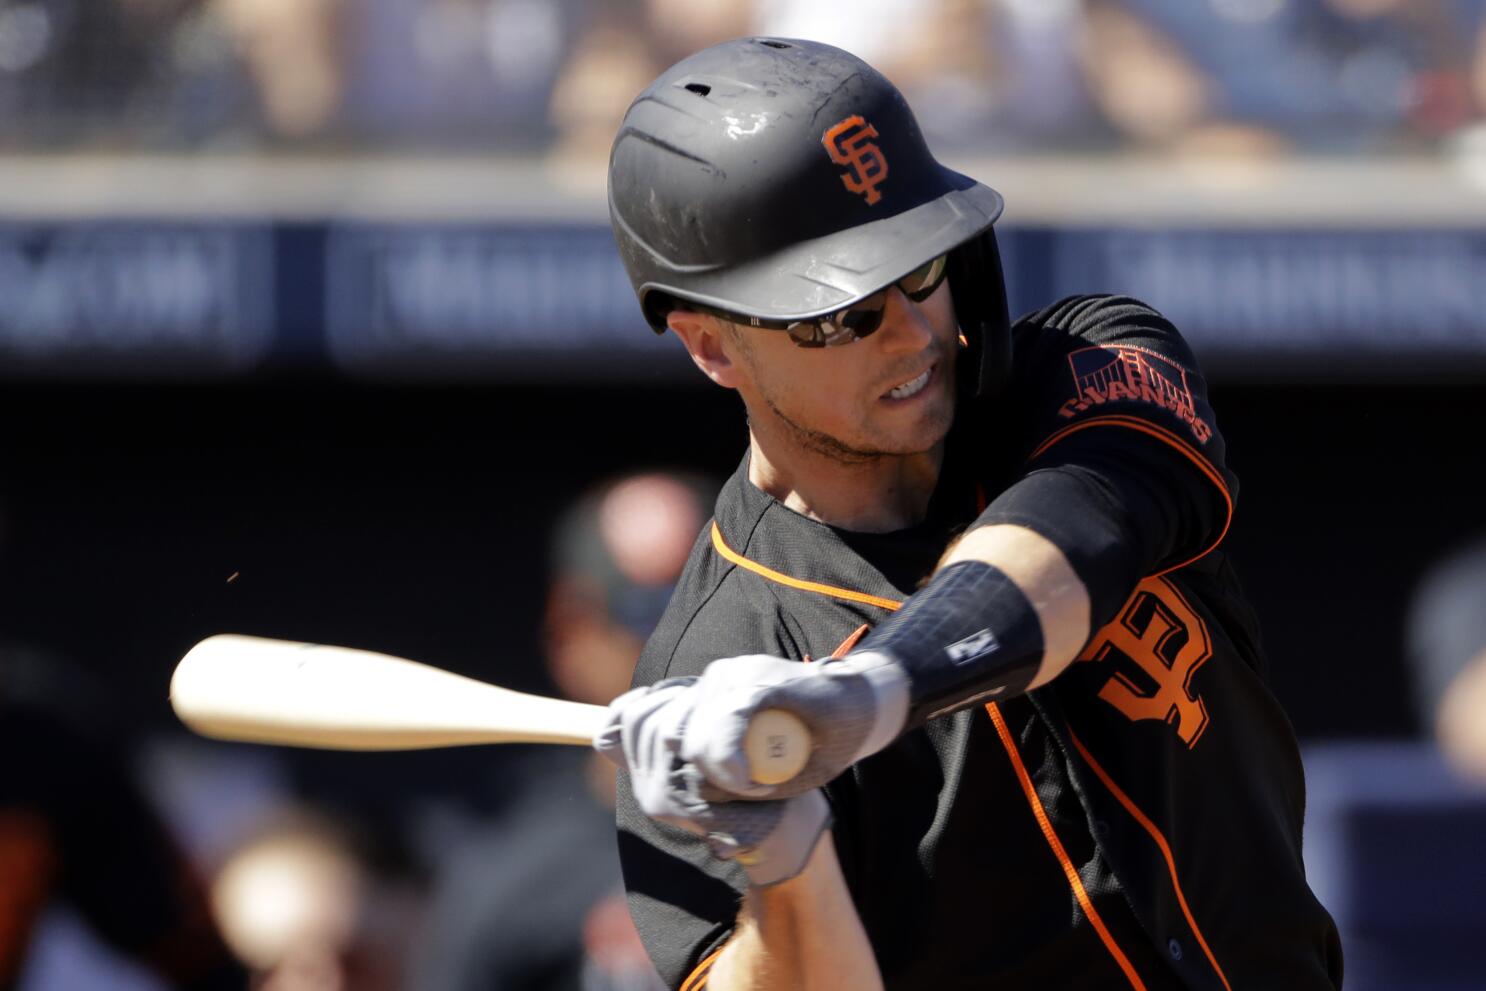 100+] Buster Posey Pictures